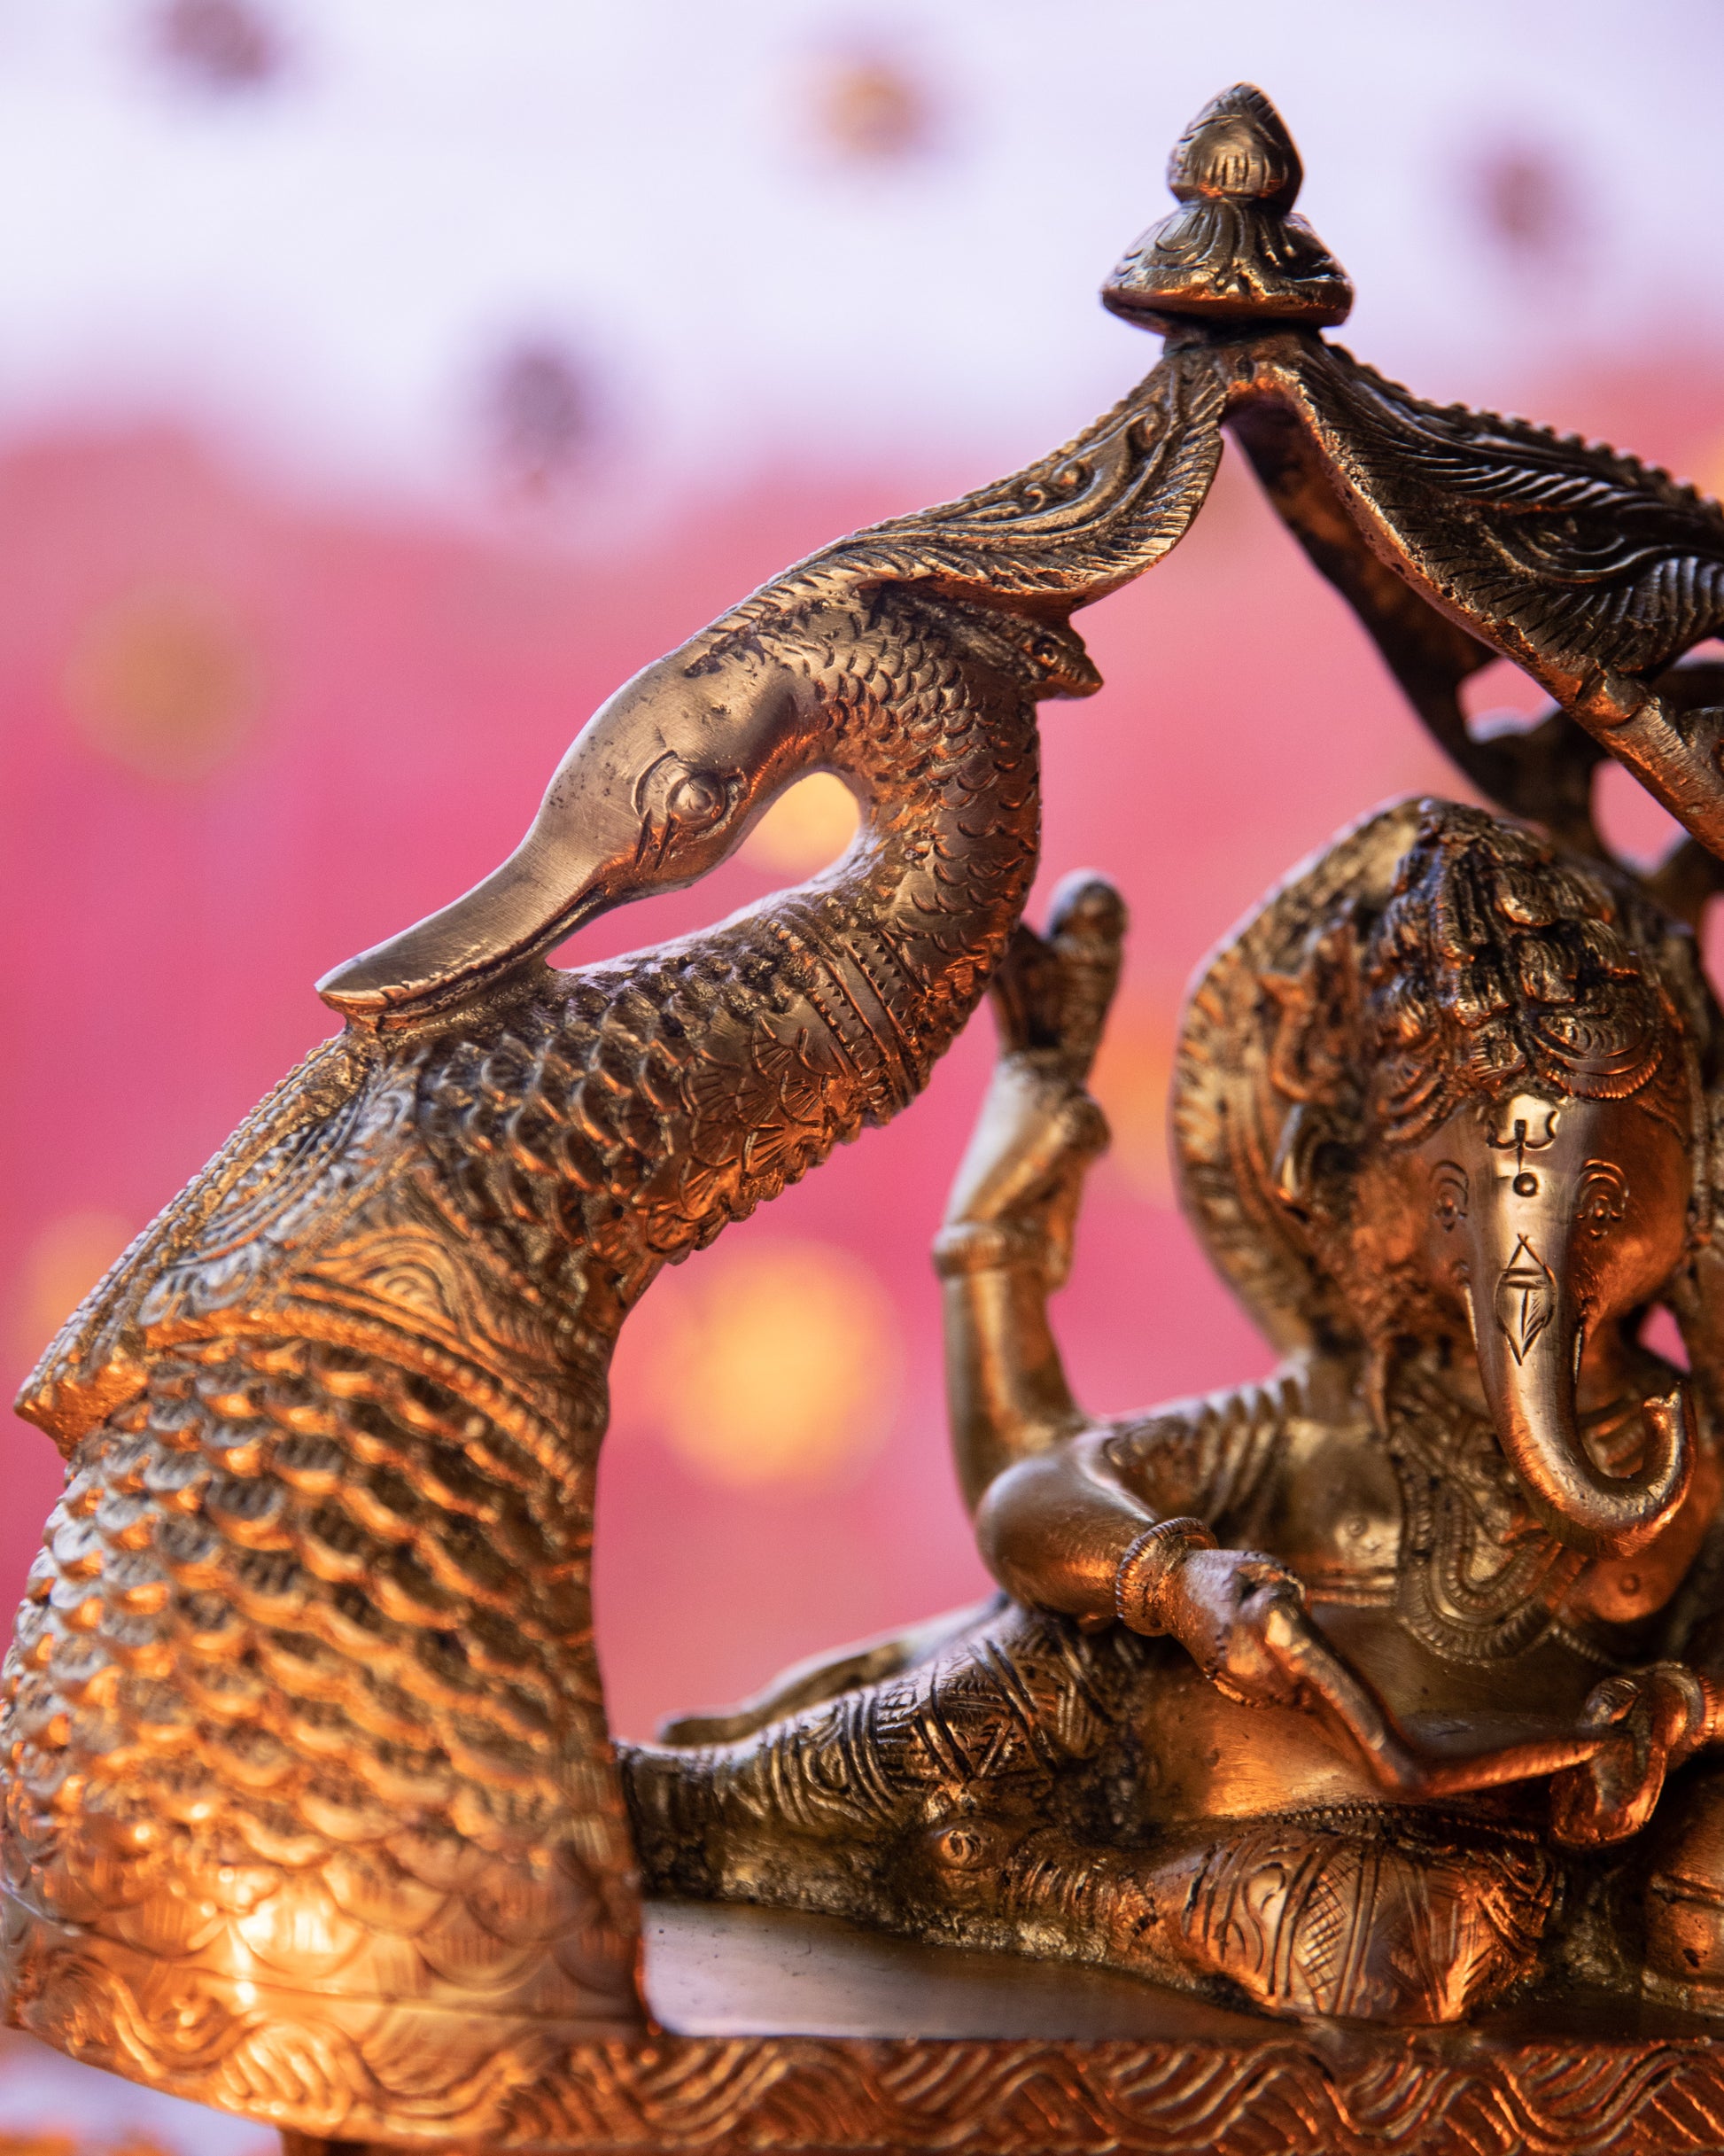 This intricately crafted pure brass idol radiates the majestic presence of Lord Ganesha